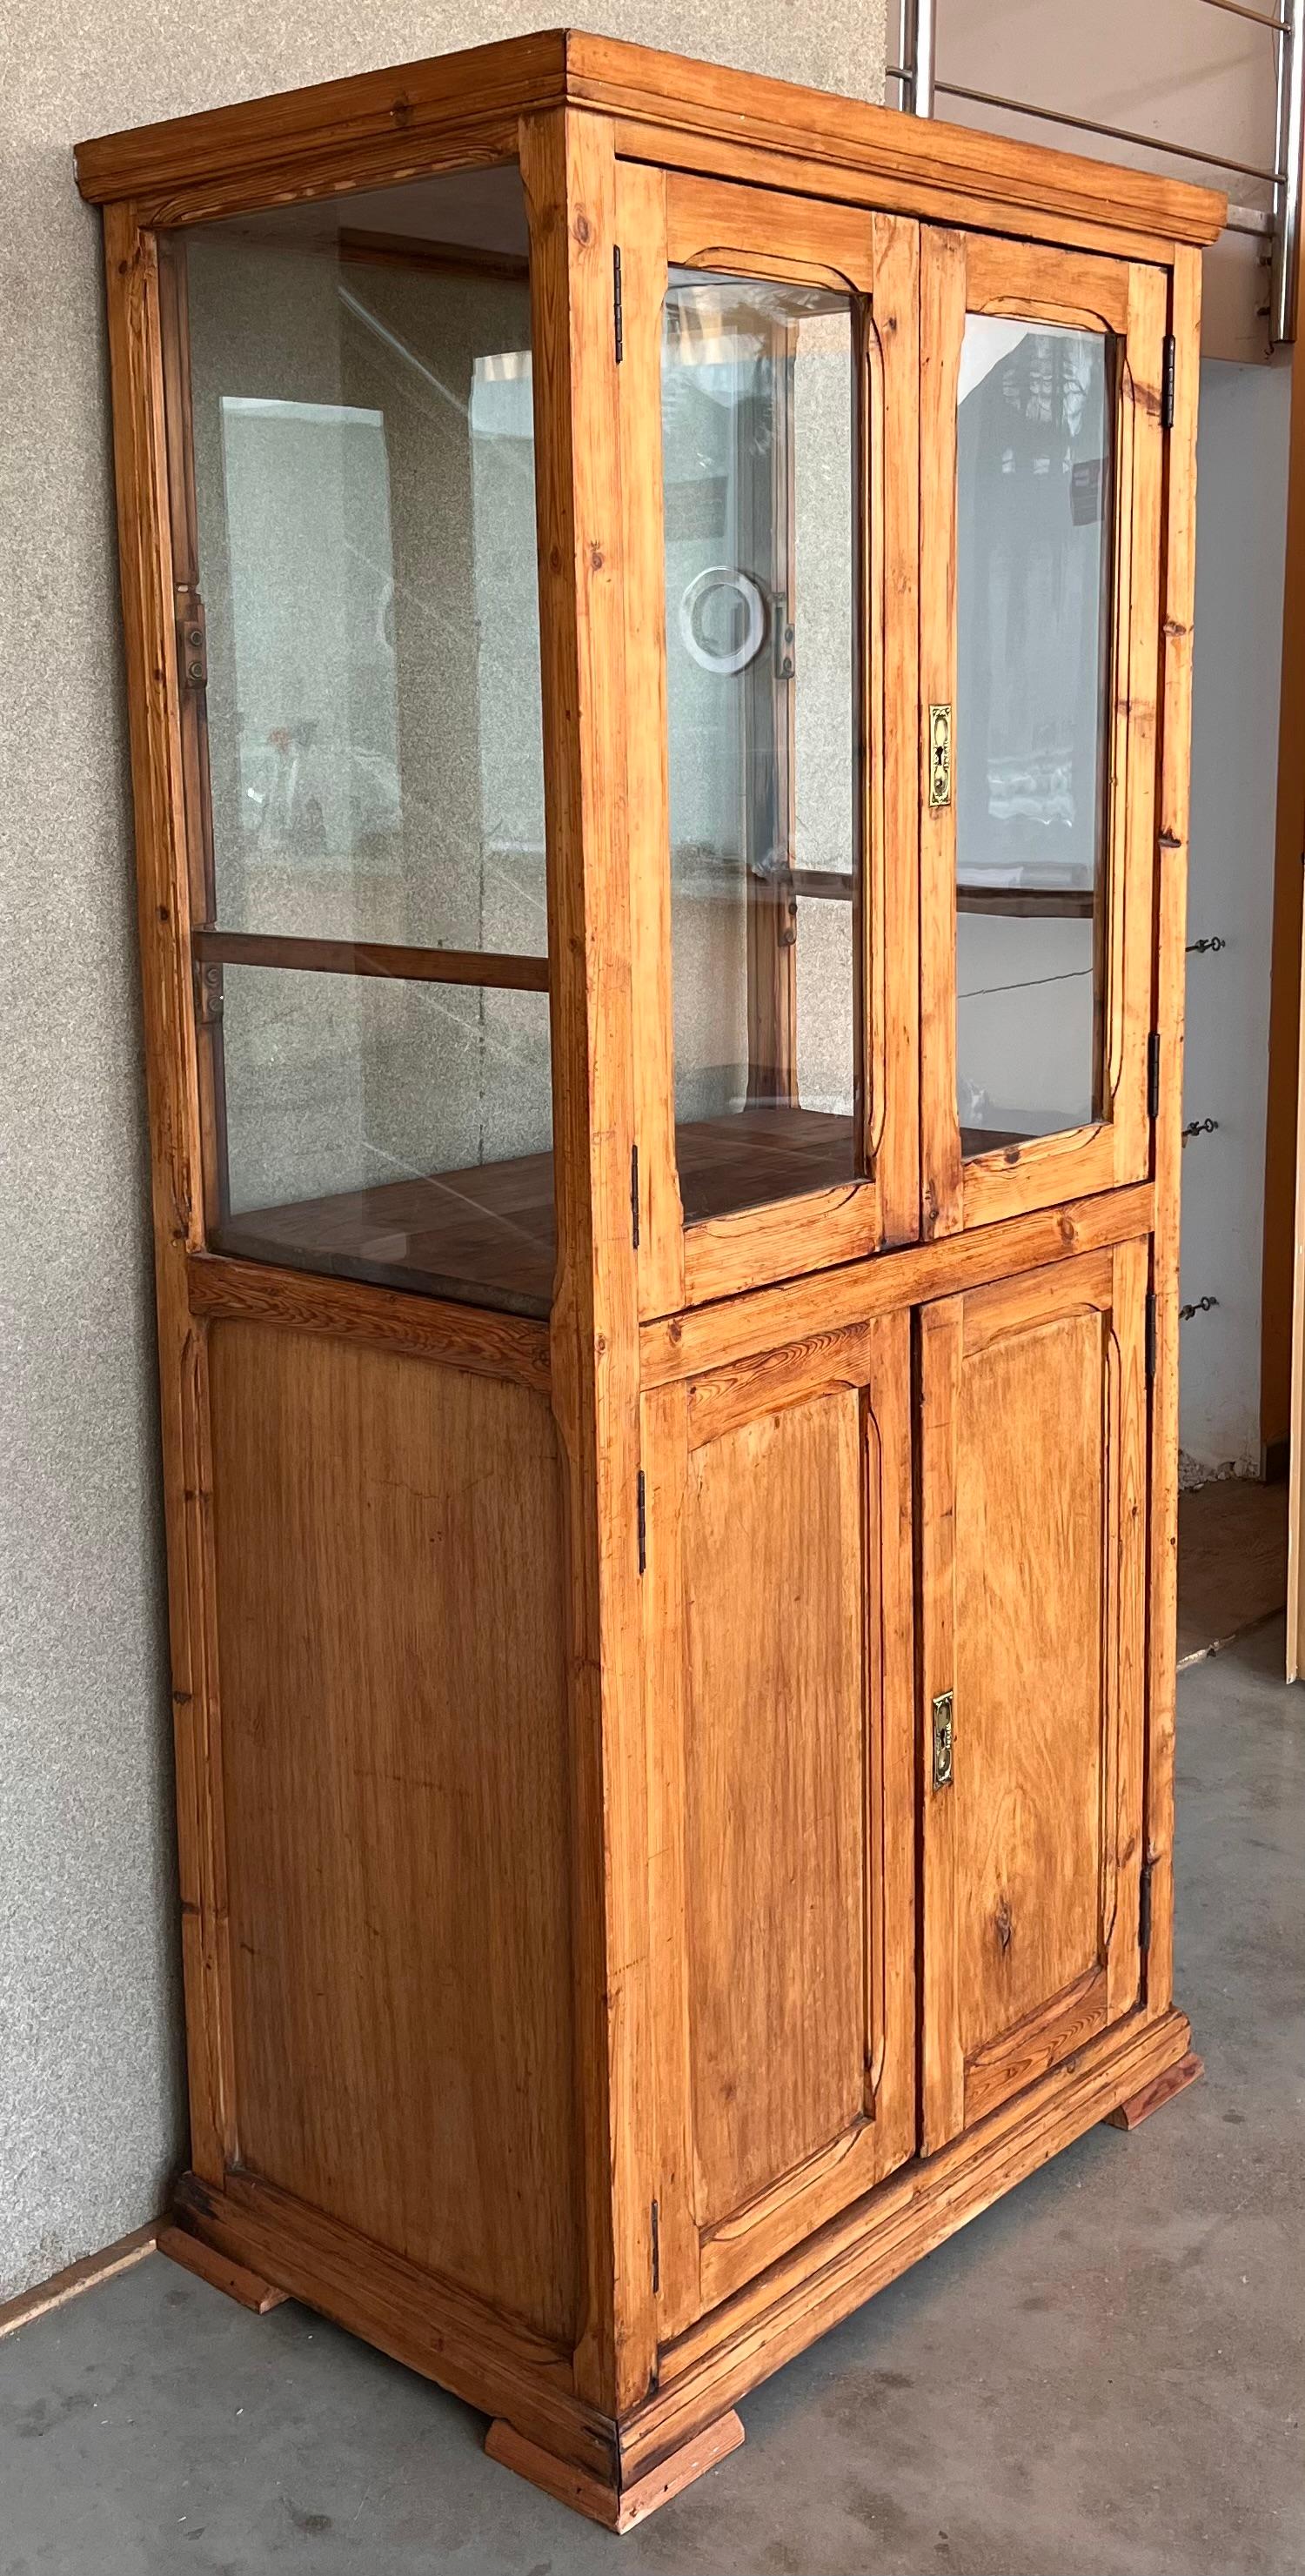 Spanish Colonial 19th Century Large Cupboard or Bookcase with Glass Vitrine, Pine, Spain Restored For Sale